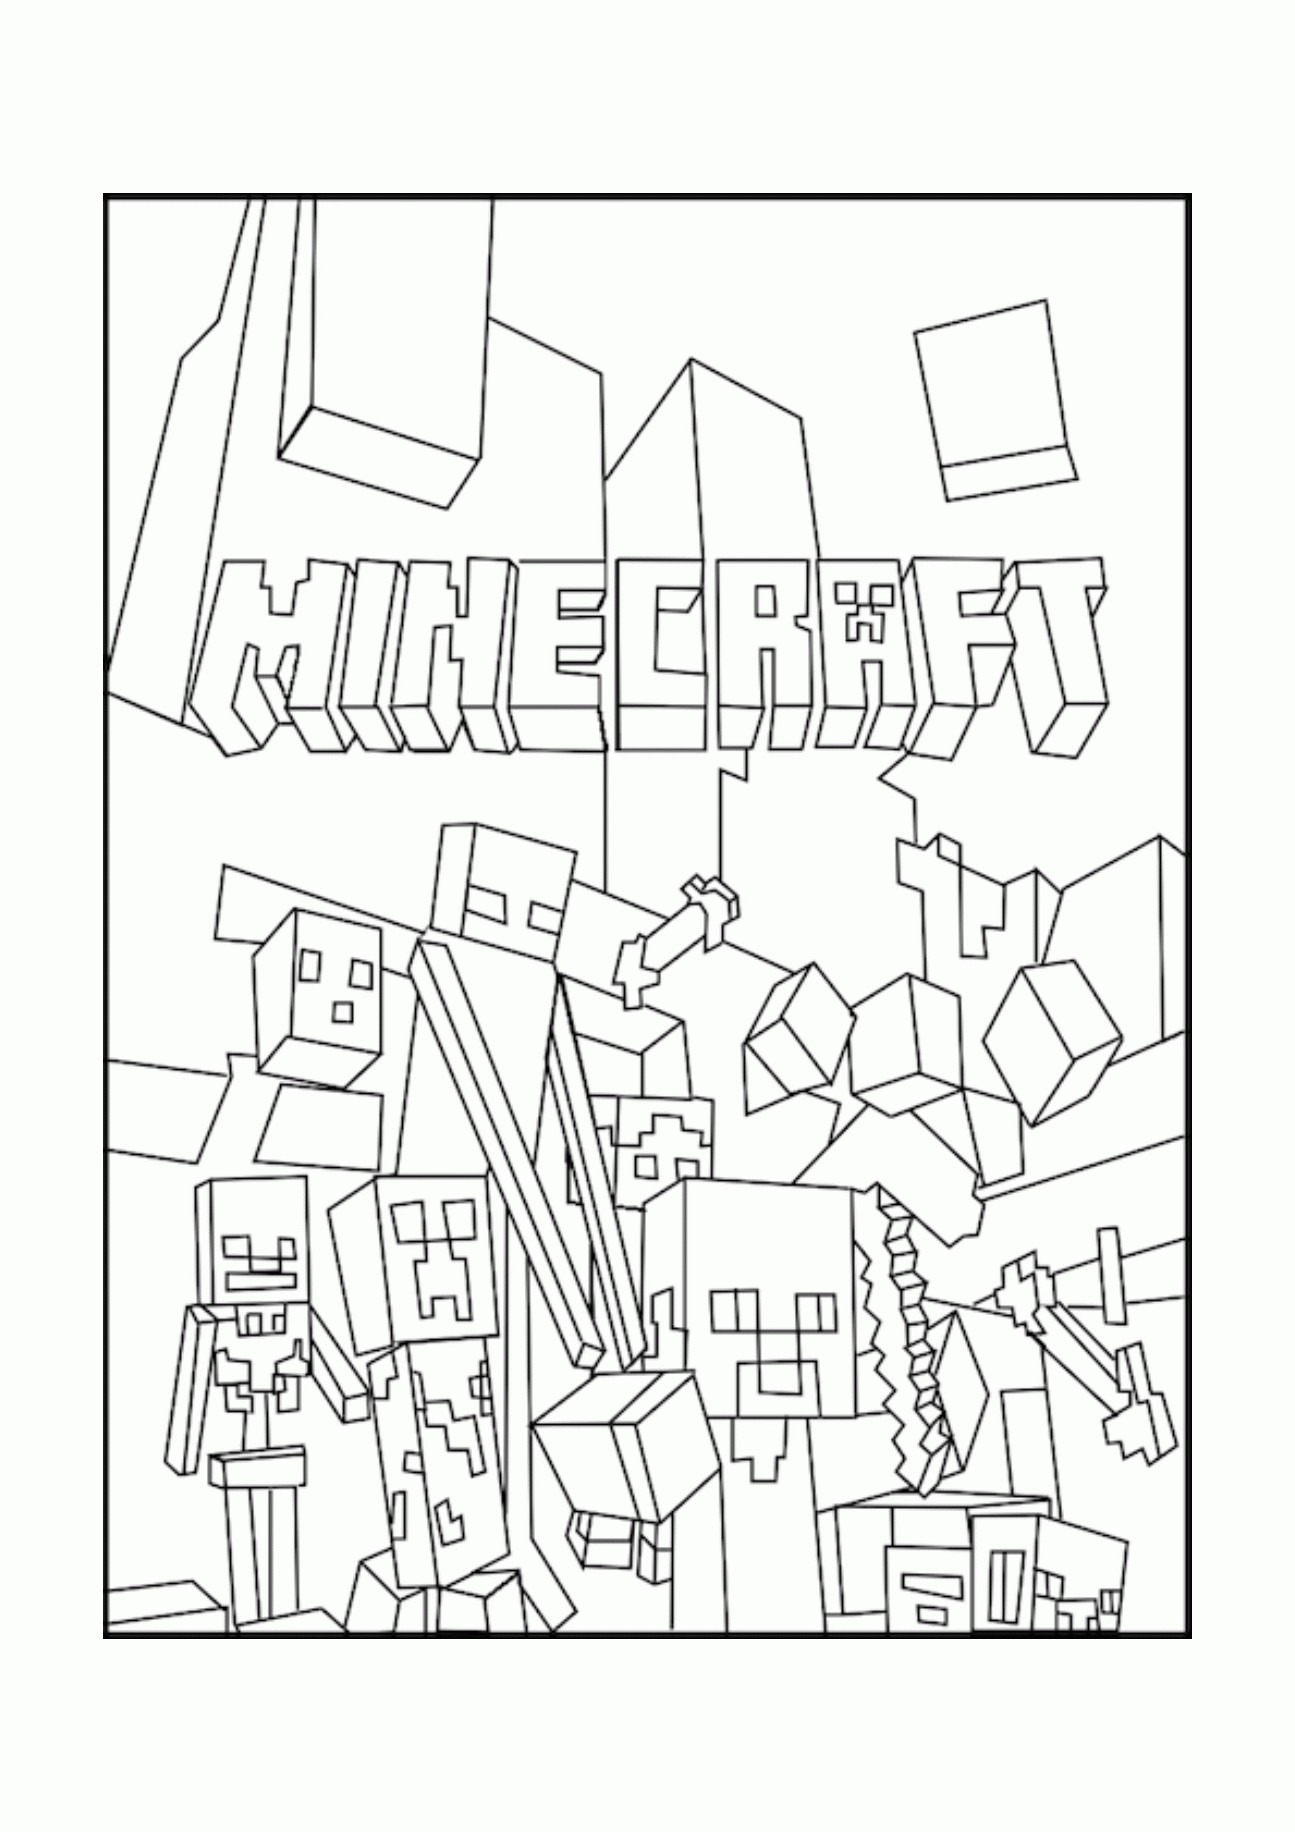 Coloring Sheets For Boys Minecrfat
 Minecraft Coloring Pages For Kids Coloring Home